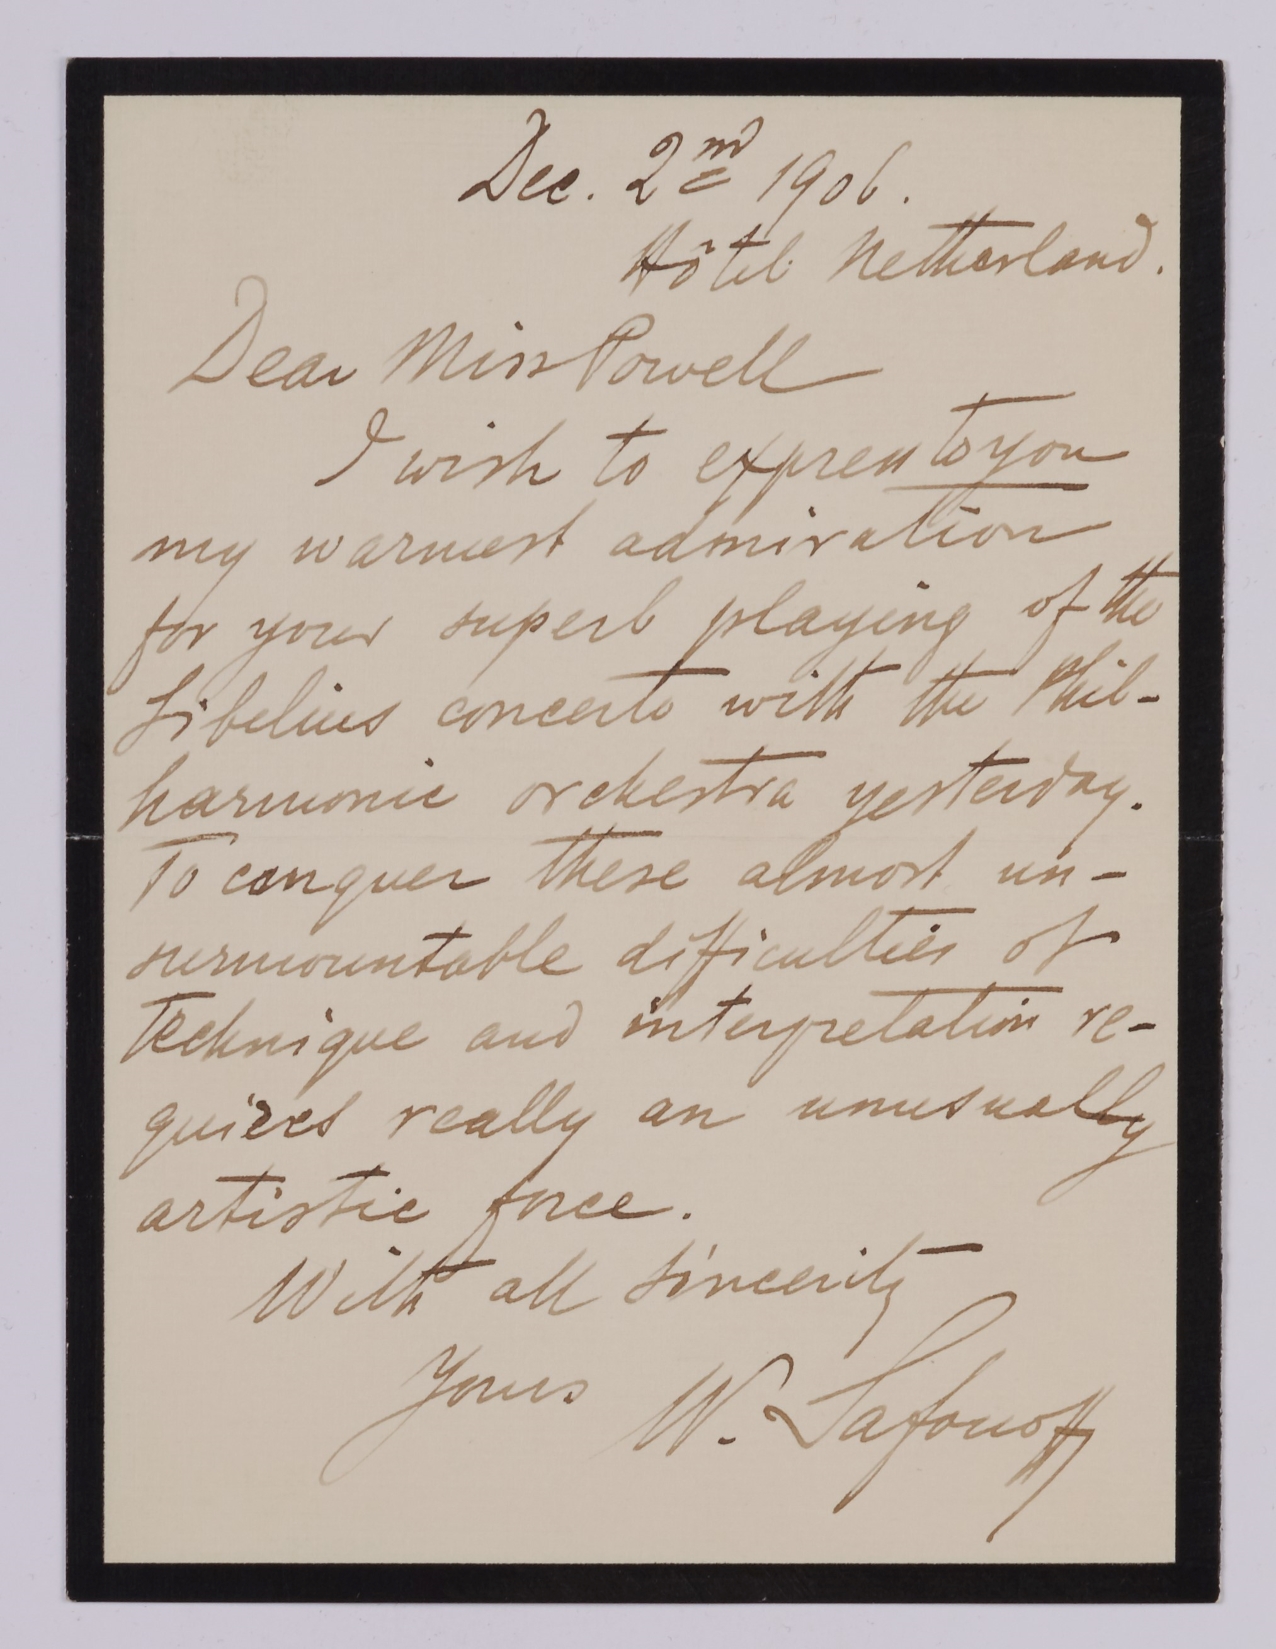 A letter signed by Wassily Safonoff to Maud Powell